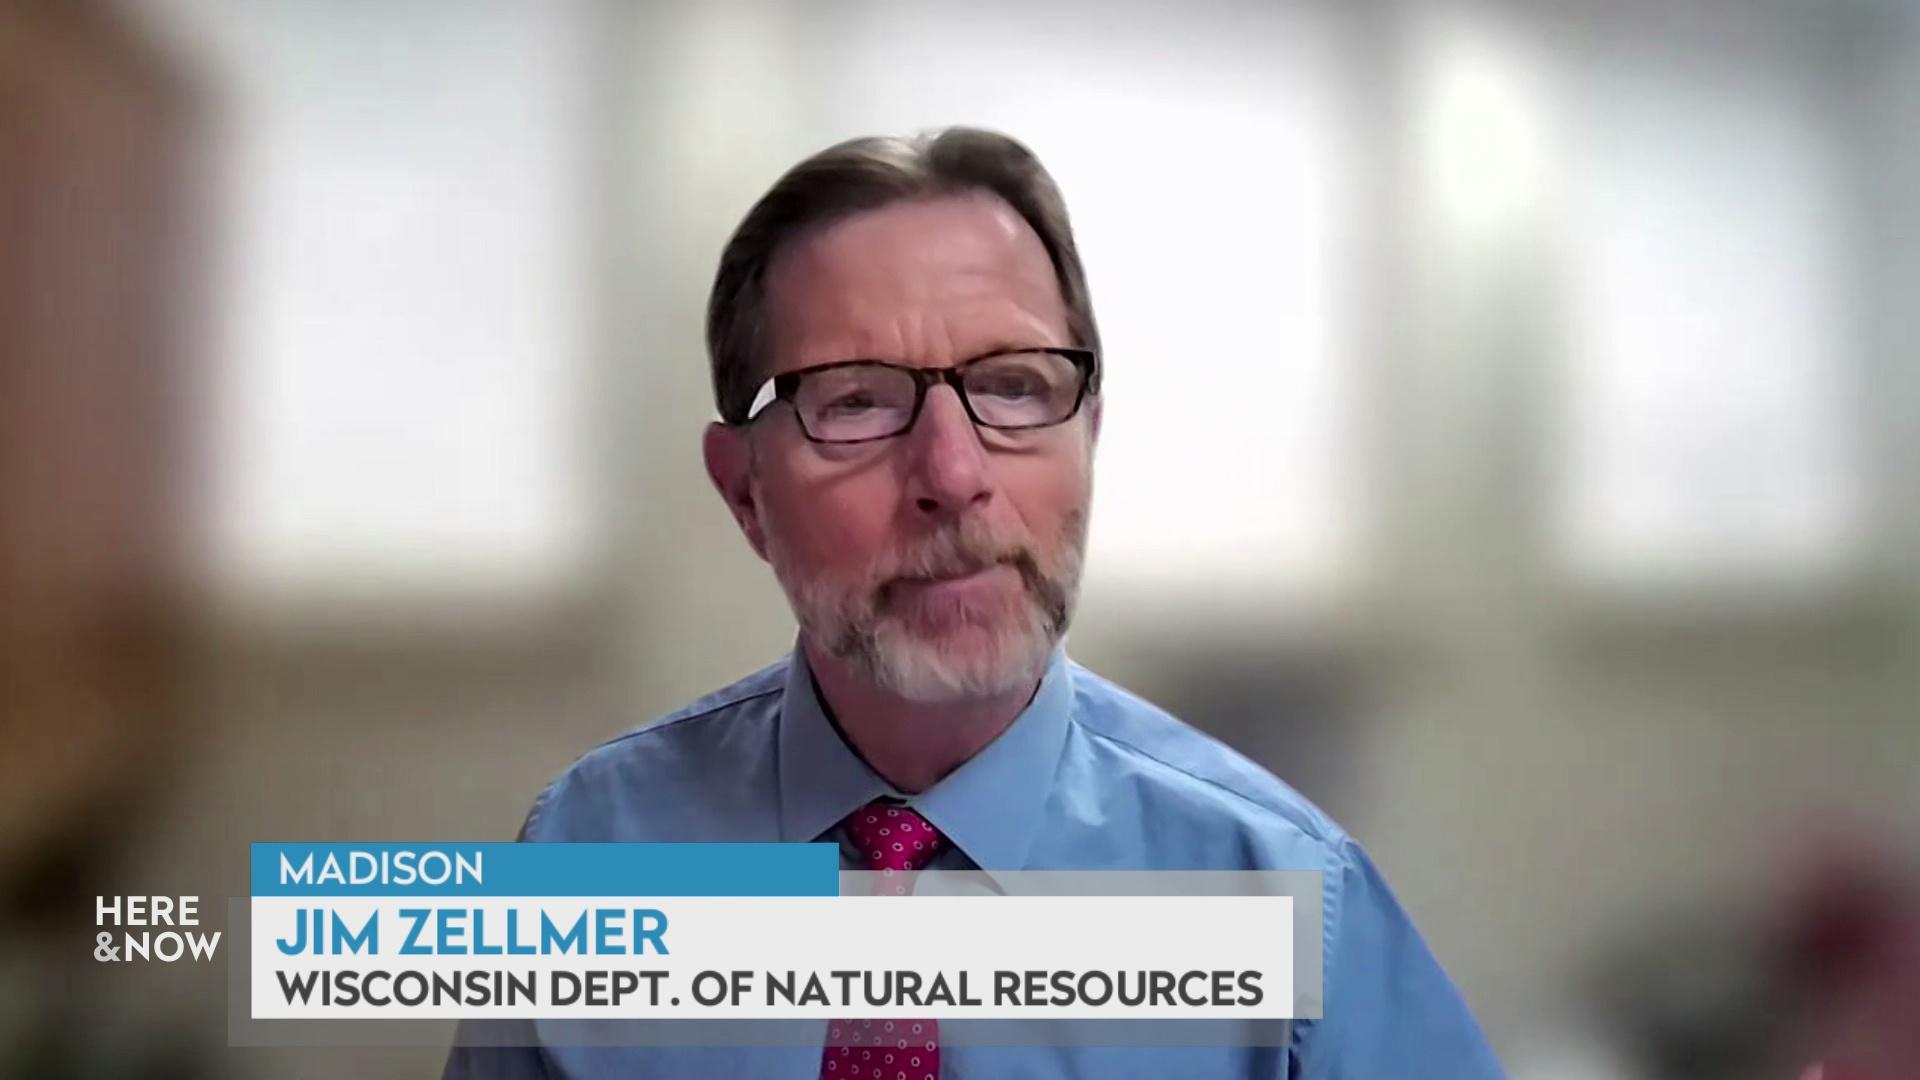 Jim Zellmer on how the DNR approaches nitrate contamination